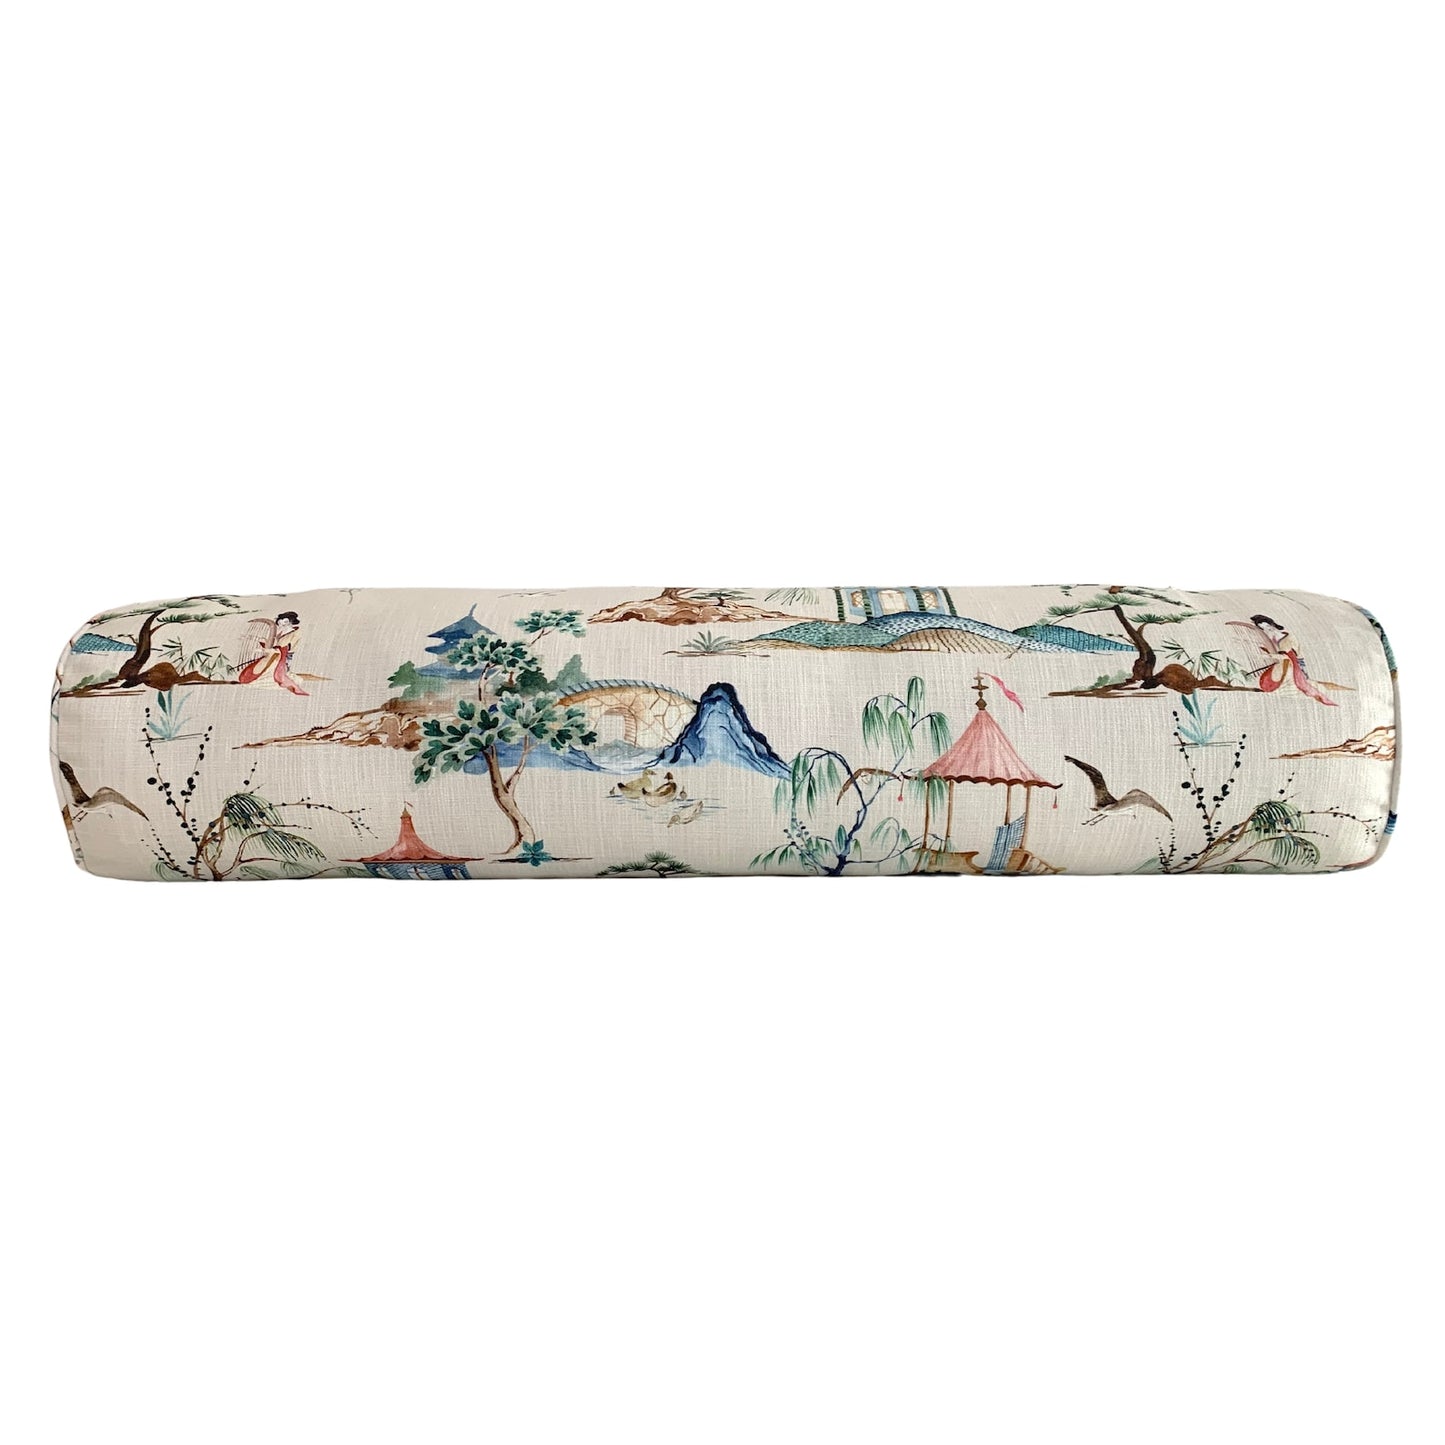 Chinoiserie Asian Toile Okayama Pillow Cover in Flax - Available in Bolster, Lumbar, Throw, and Euro Sham Cover